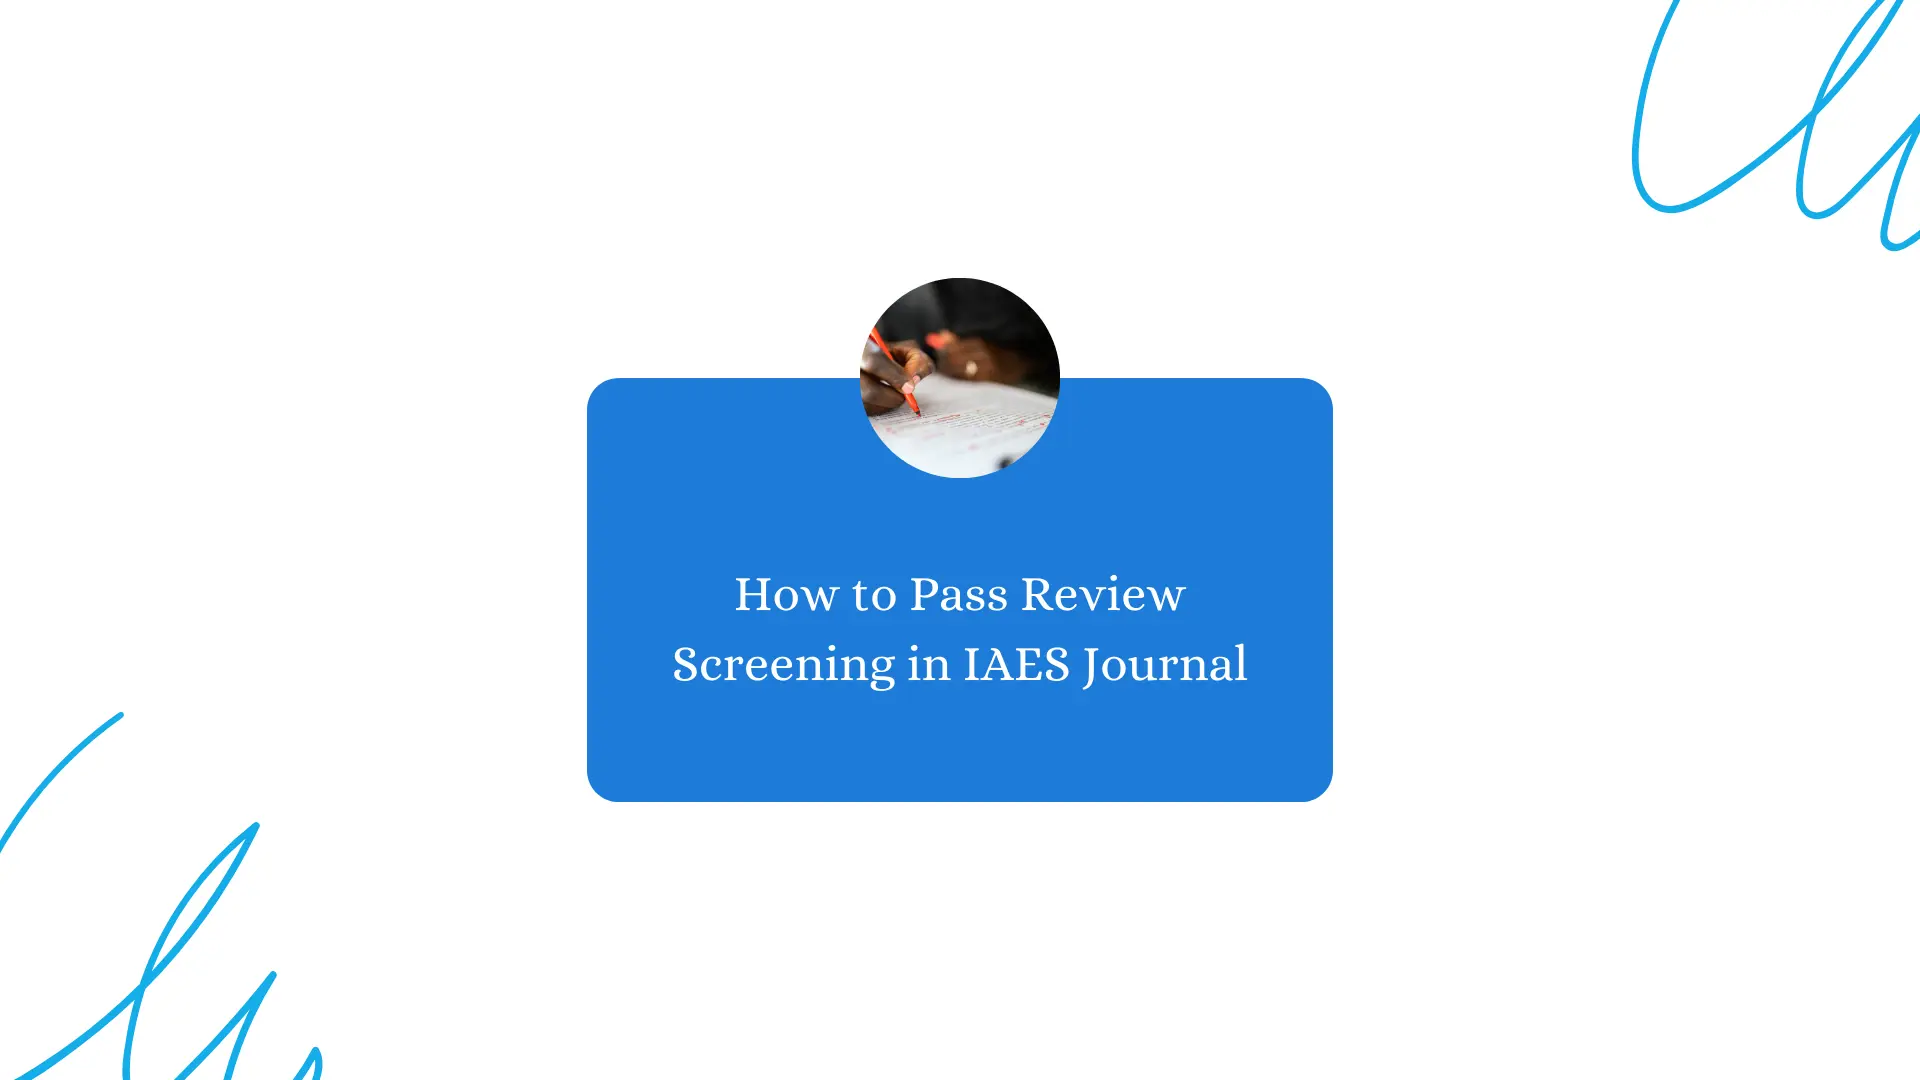 To pass review screening in the IAES journal